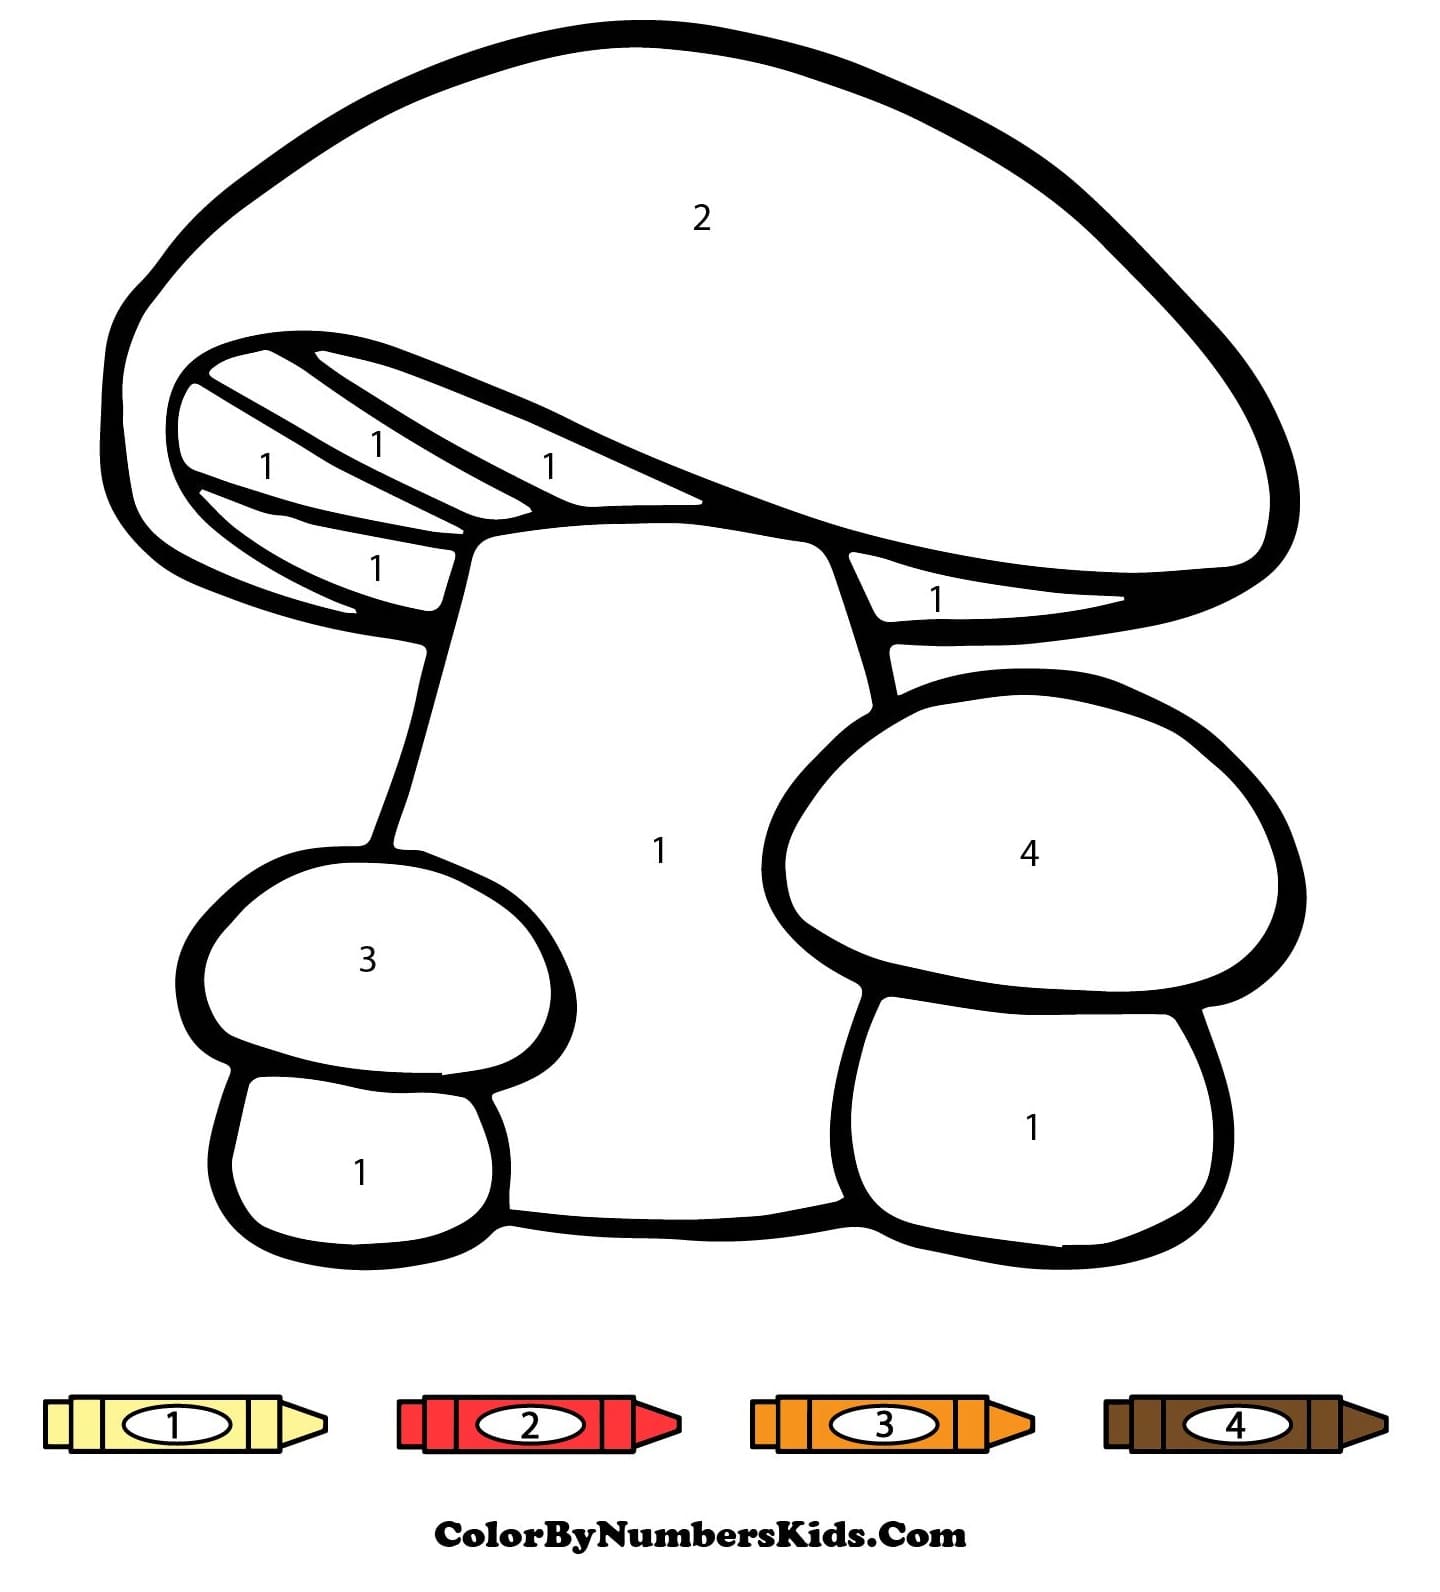 Three Mushrooms Color By Number